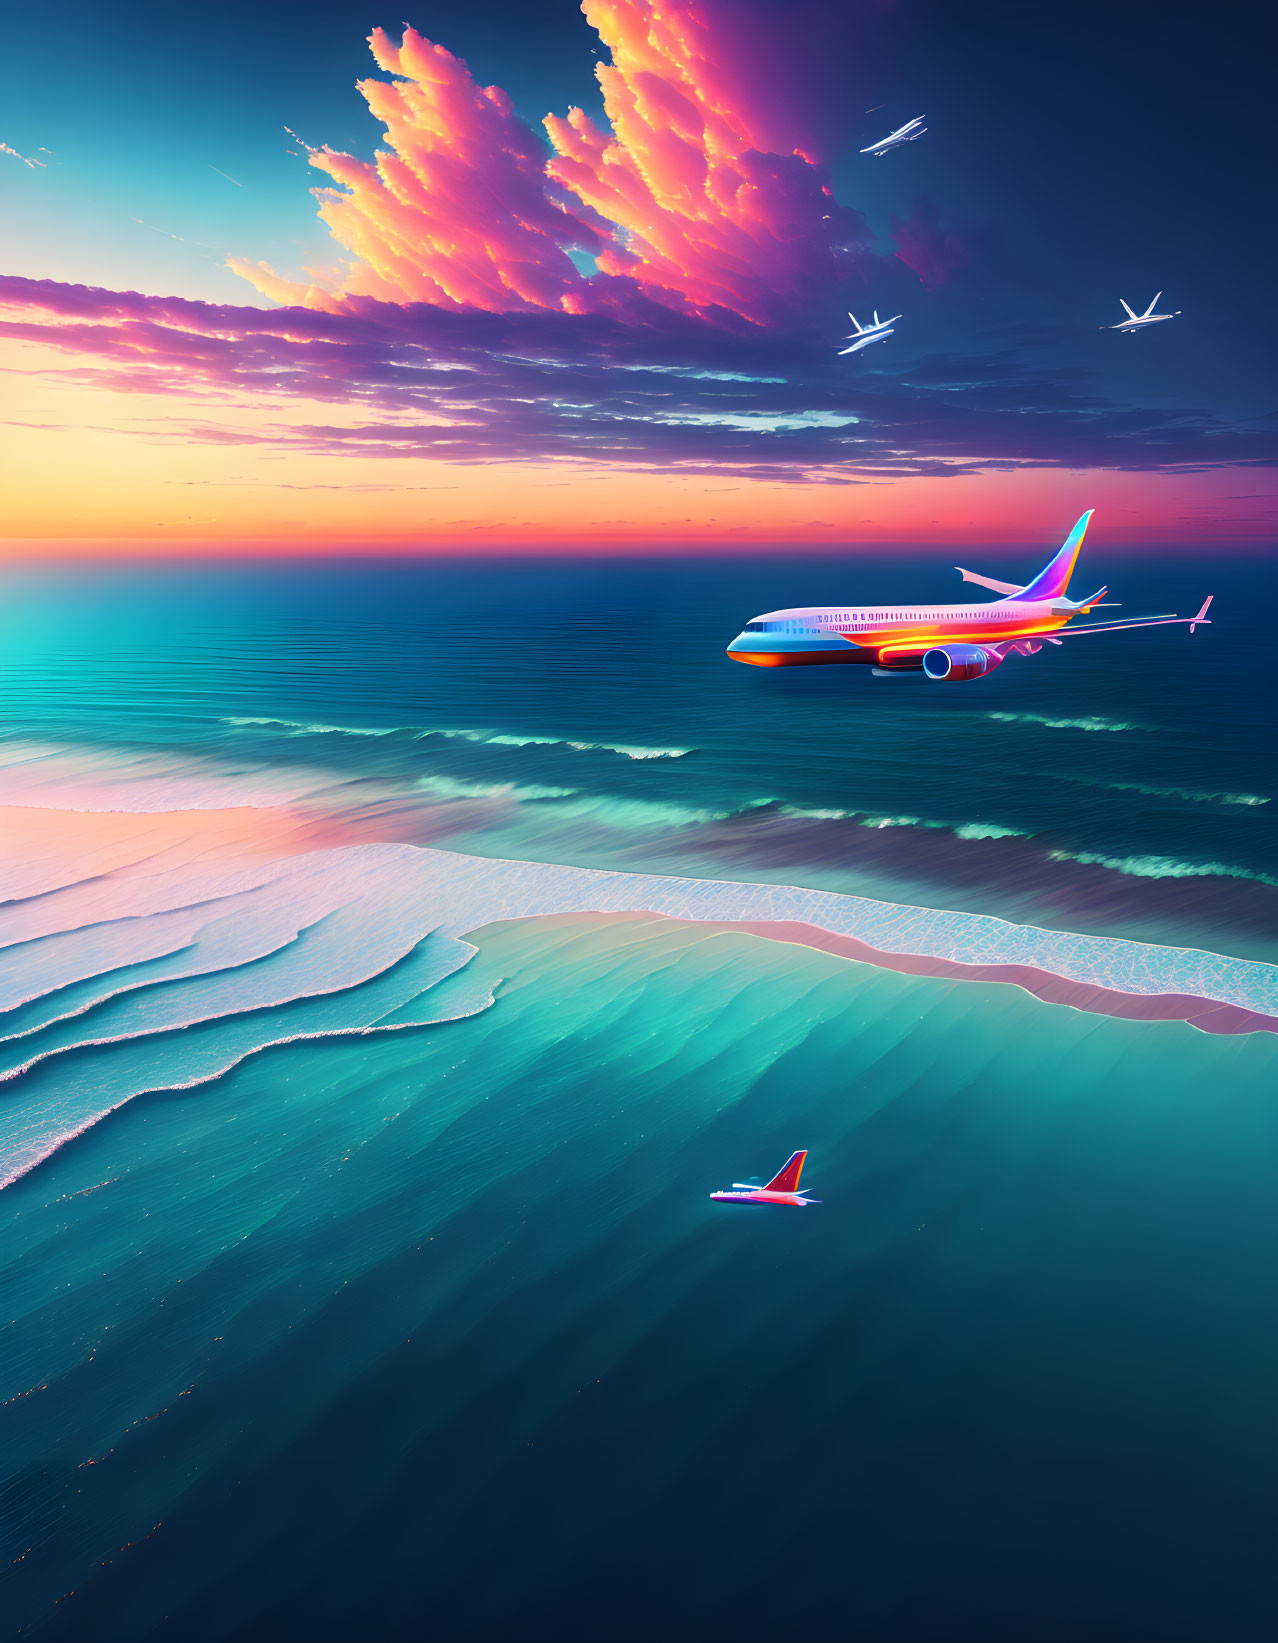 Airplane over Ocean